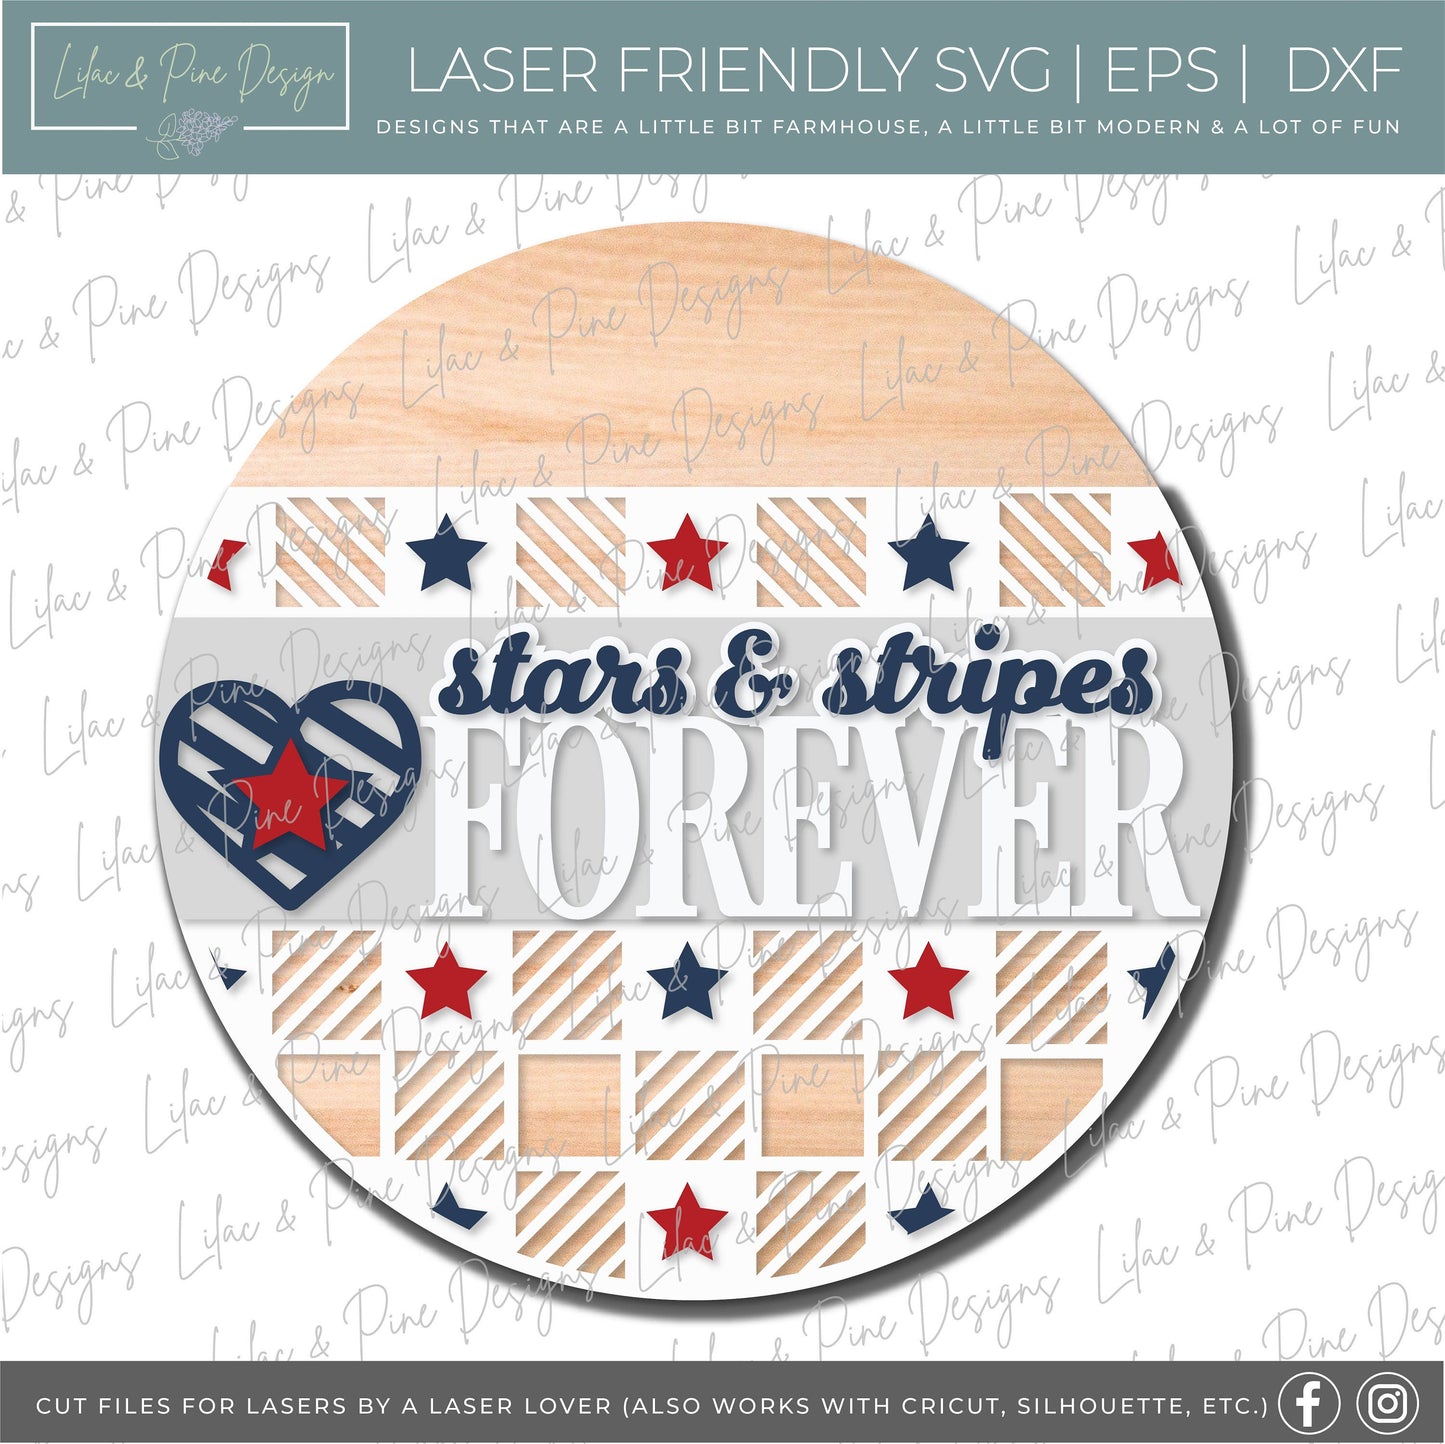 Patriotic Welcome sign, Stars and Stripes door hanger SVG, Plaid 4th of July SVG, Independence Day porch sign, Glowforge SVG, laser cut file